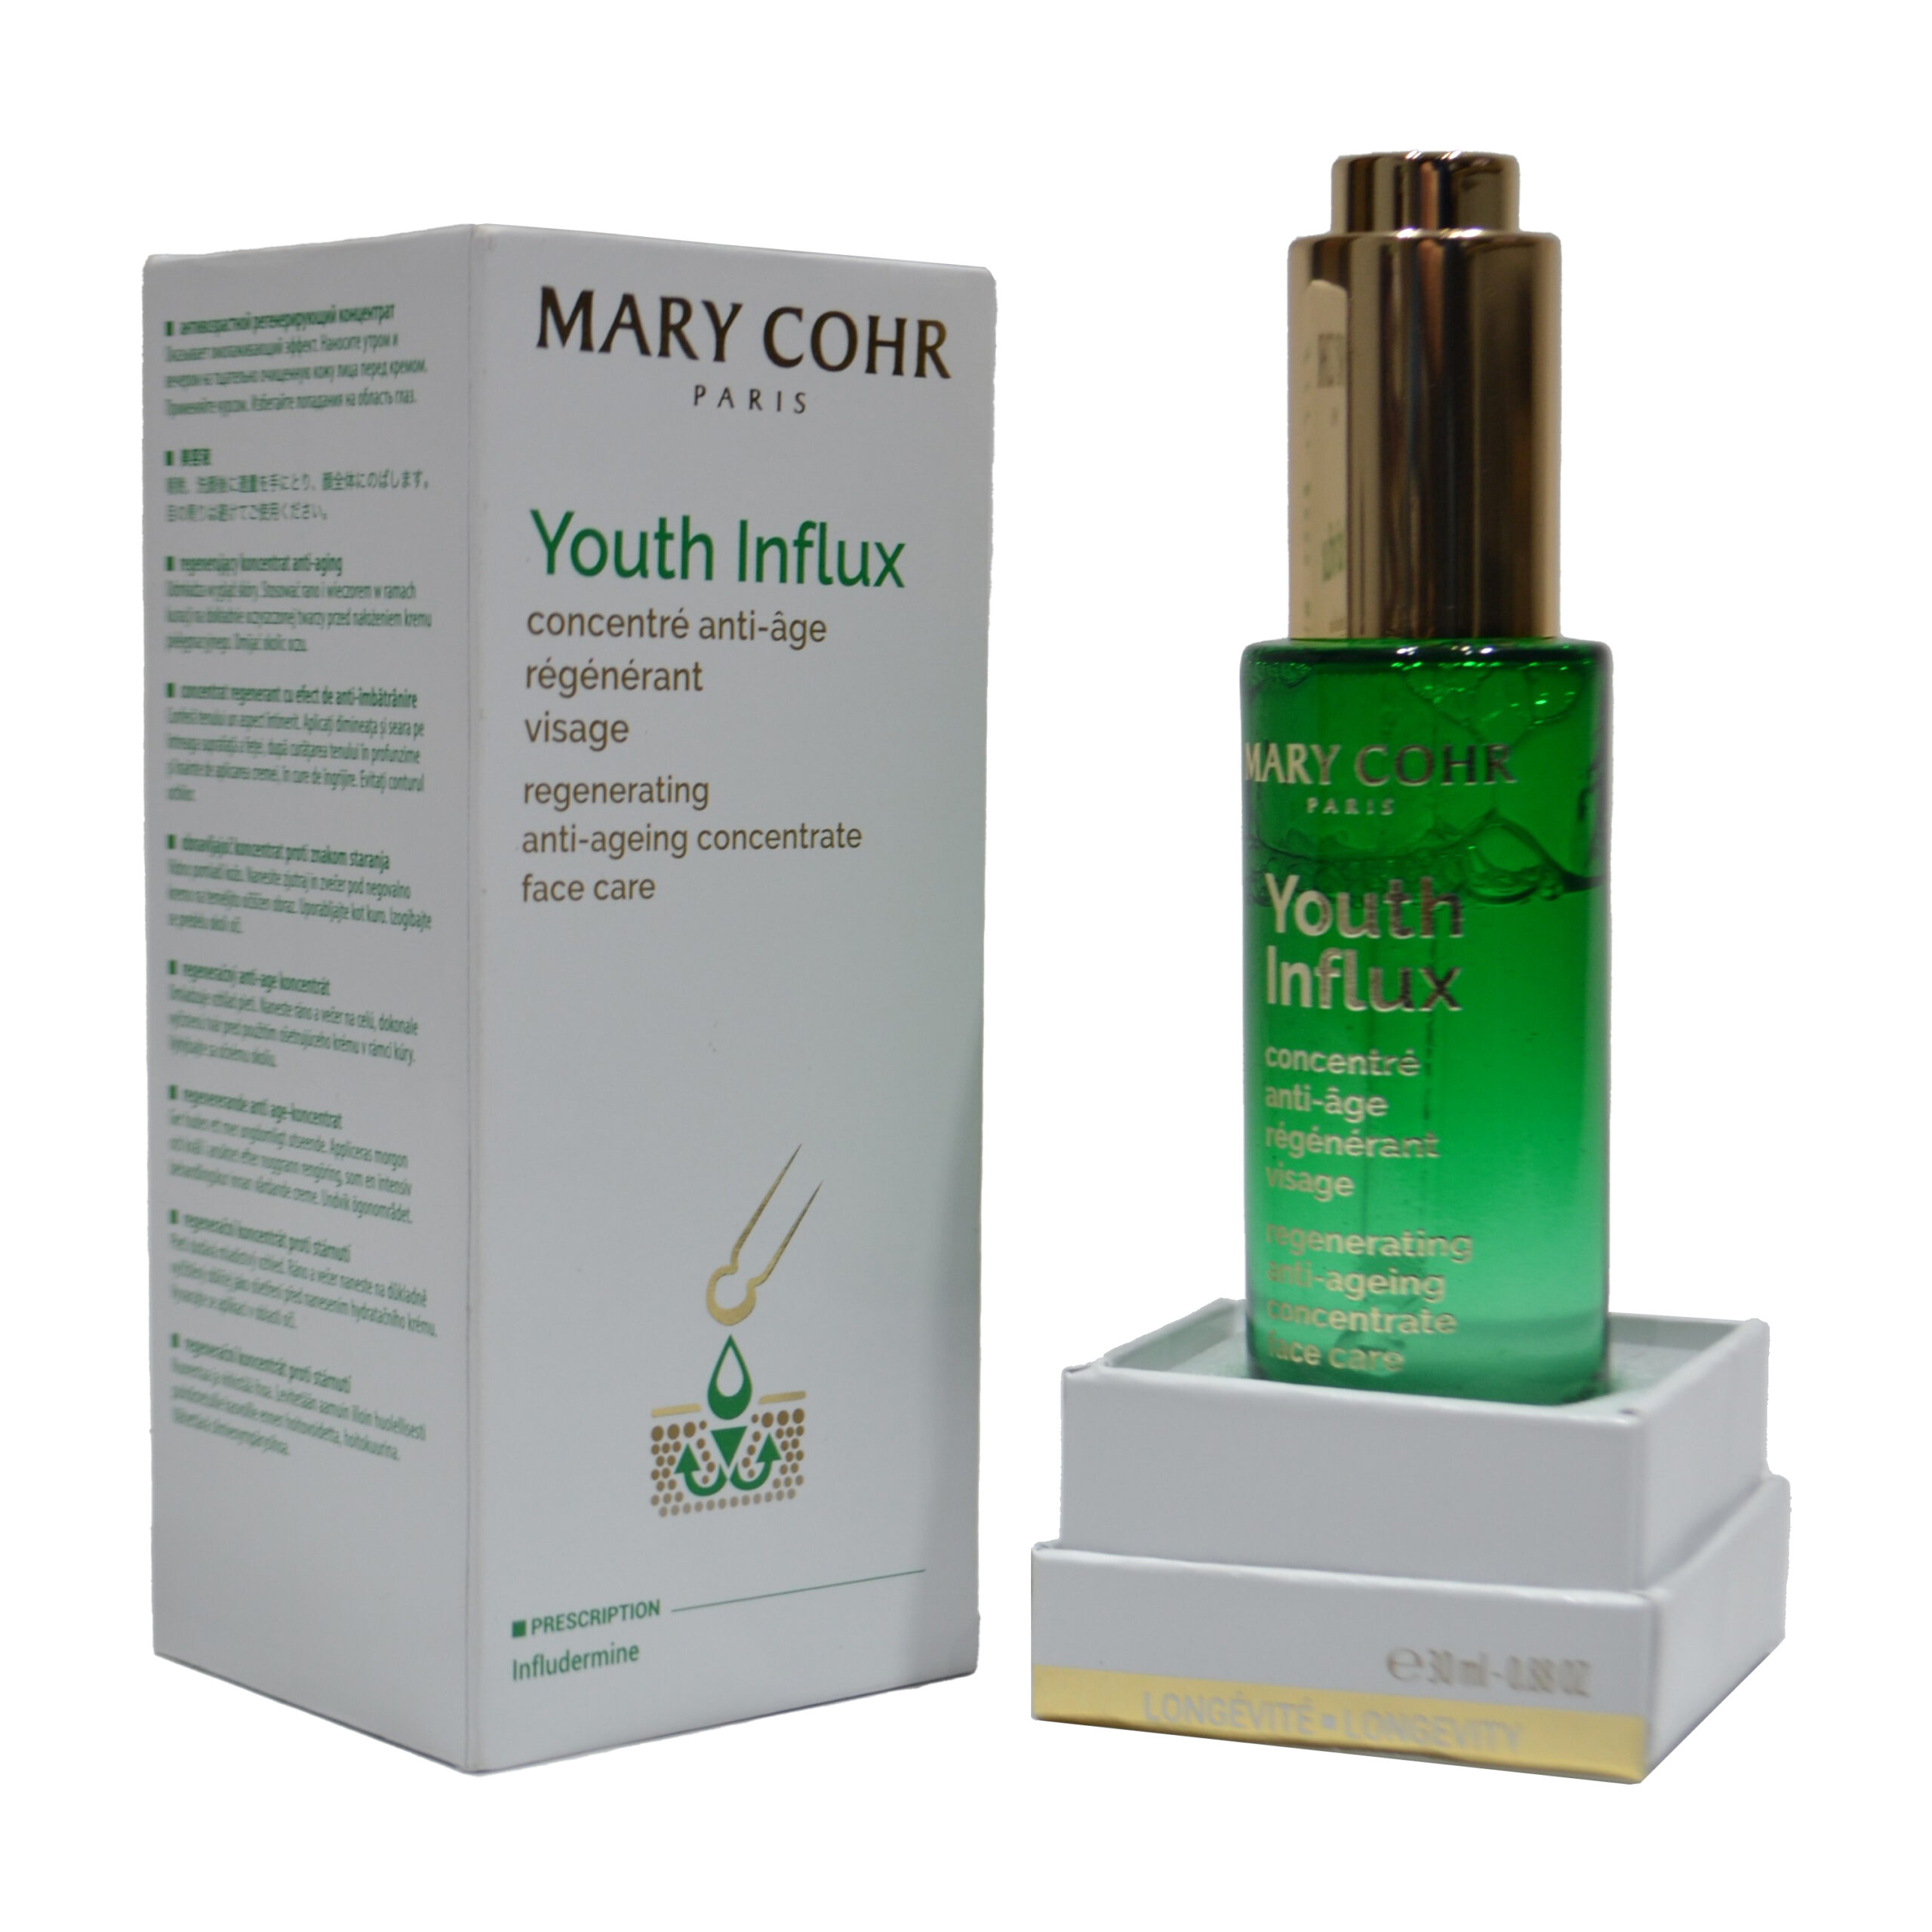 Marcy Cohr Foldable Lotion Box